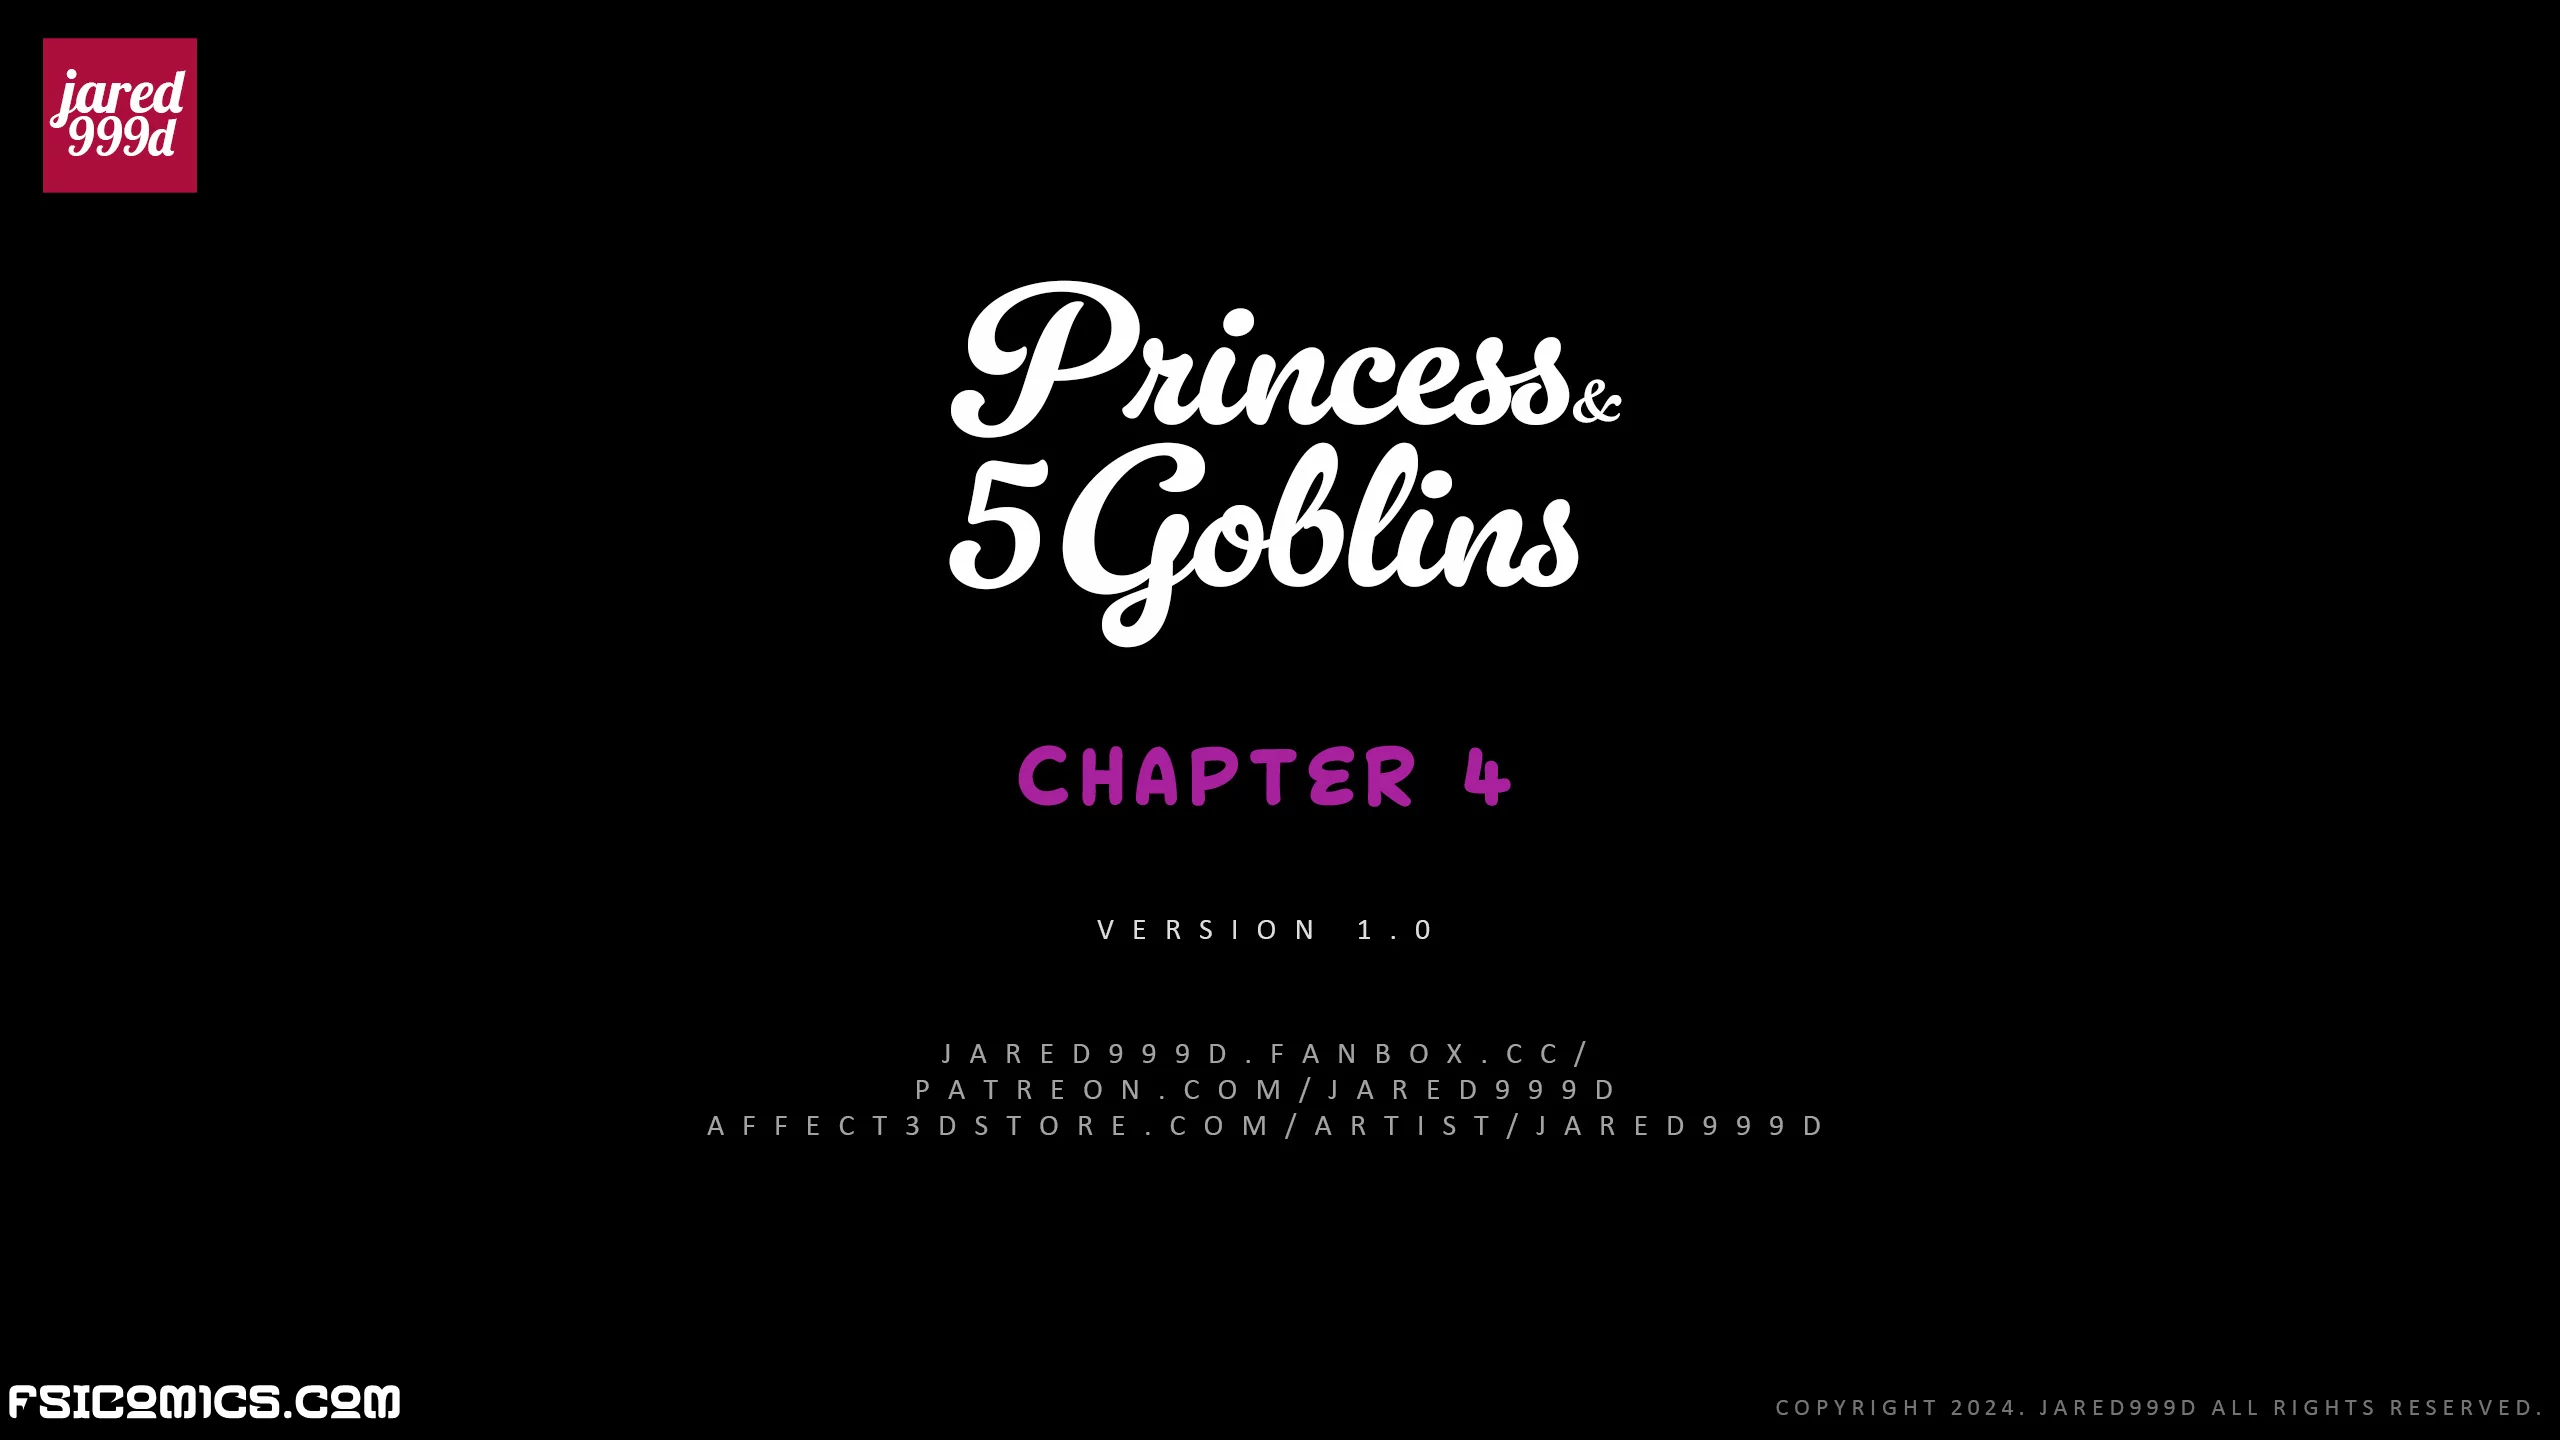 Princess And 5 Goblins Chapter 4 - Jared999D - 775 - FSIComics